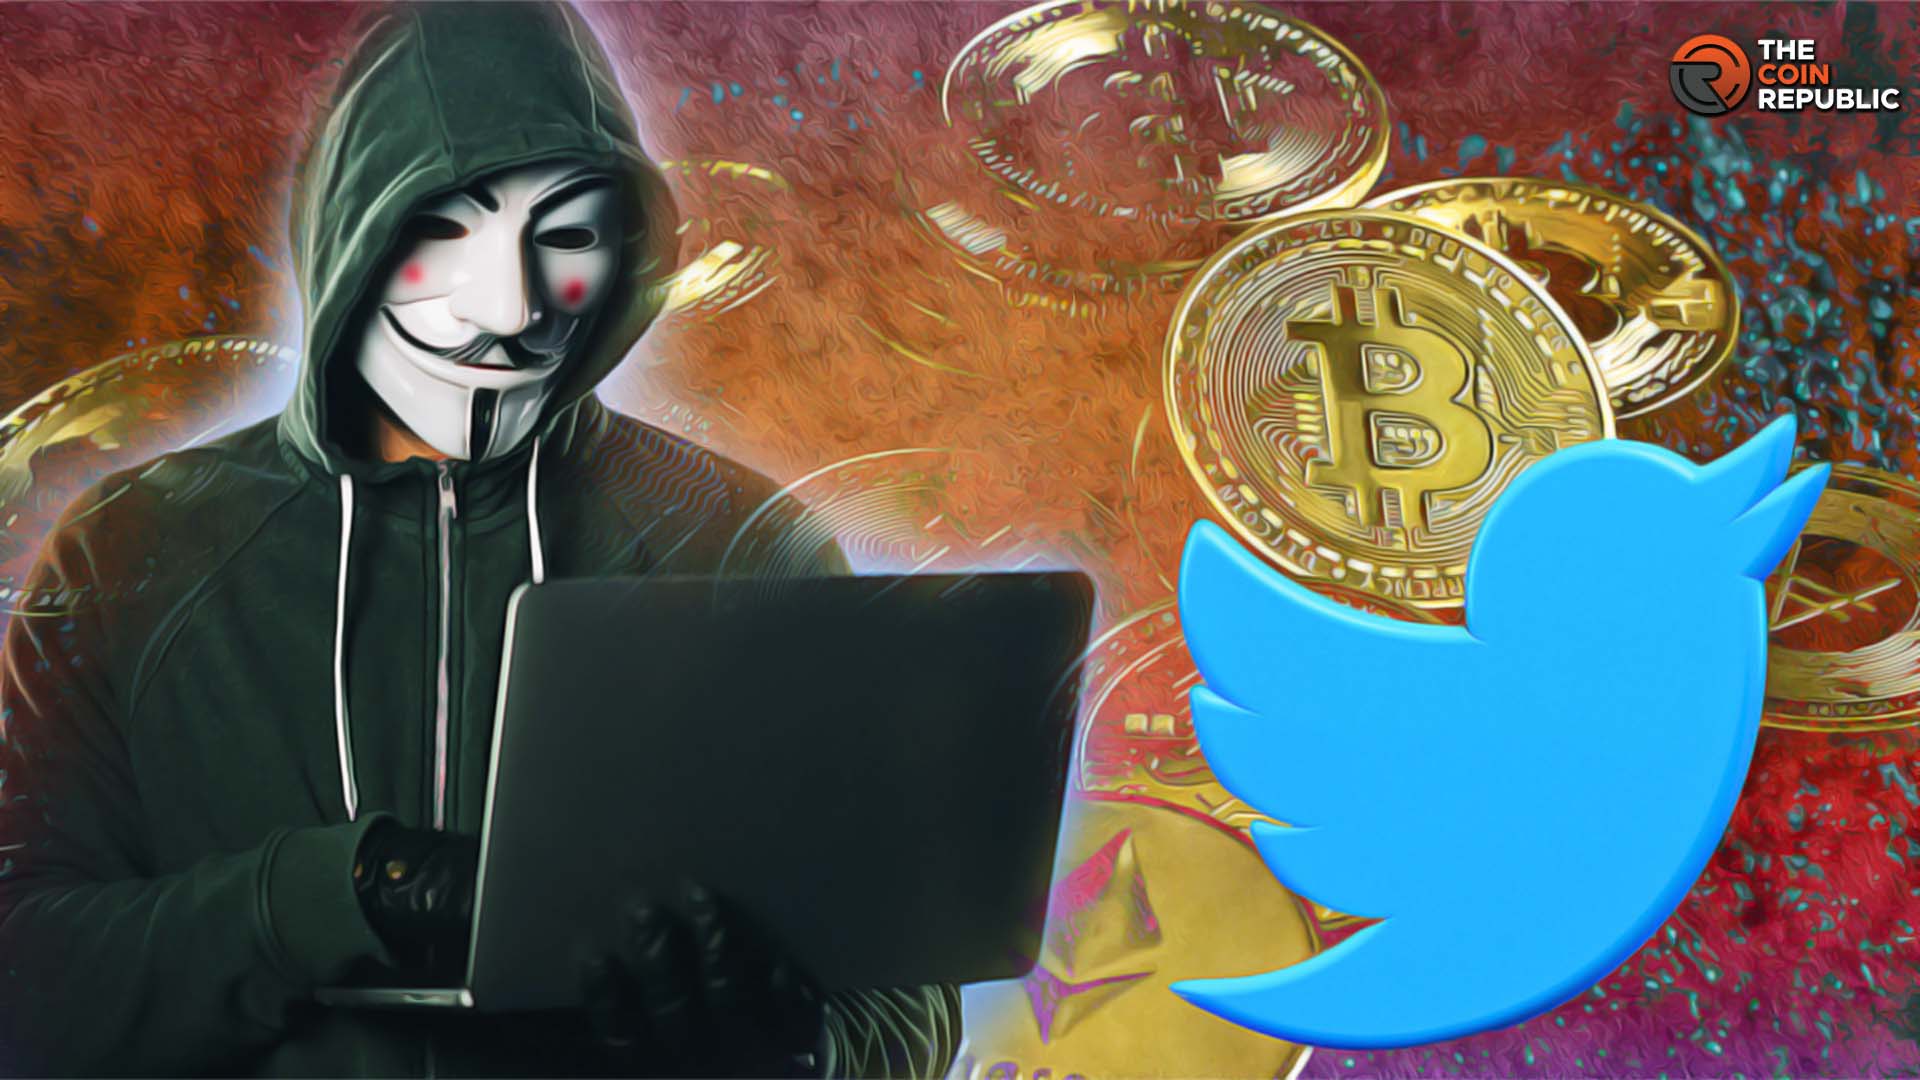 Prominent Crypto Figures’ Twitter Accounts Hacked: $1M Stolen 